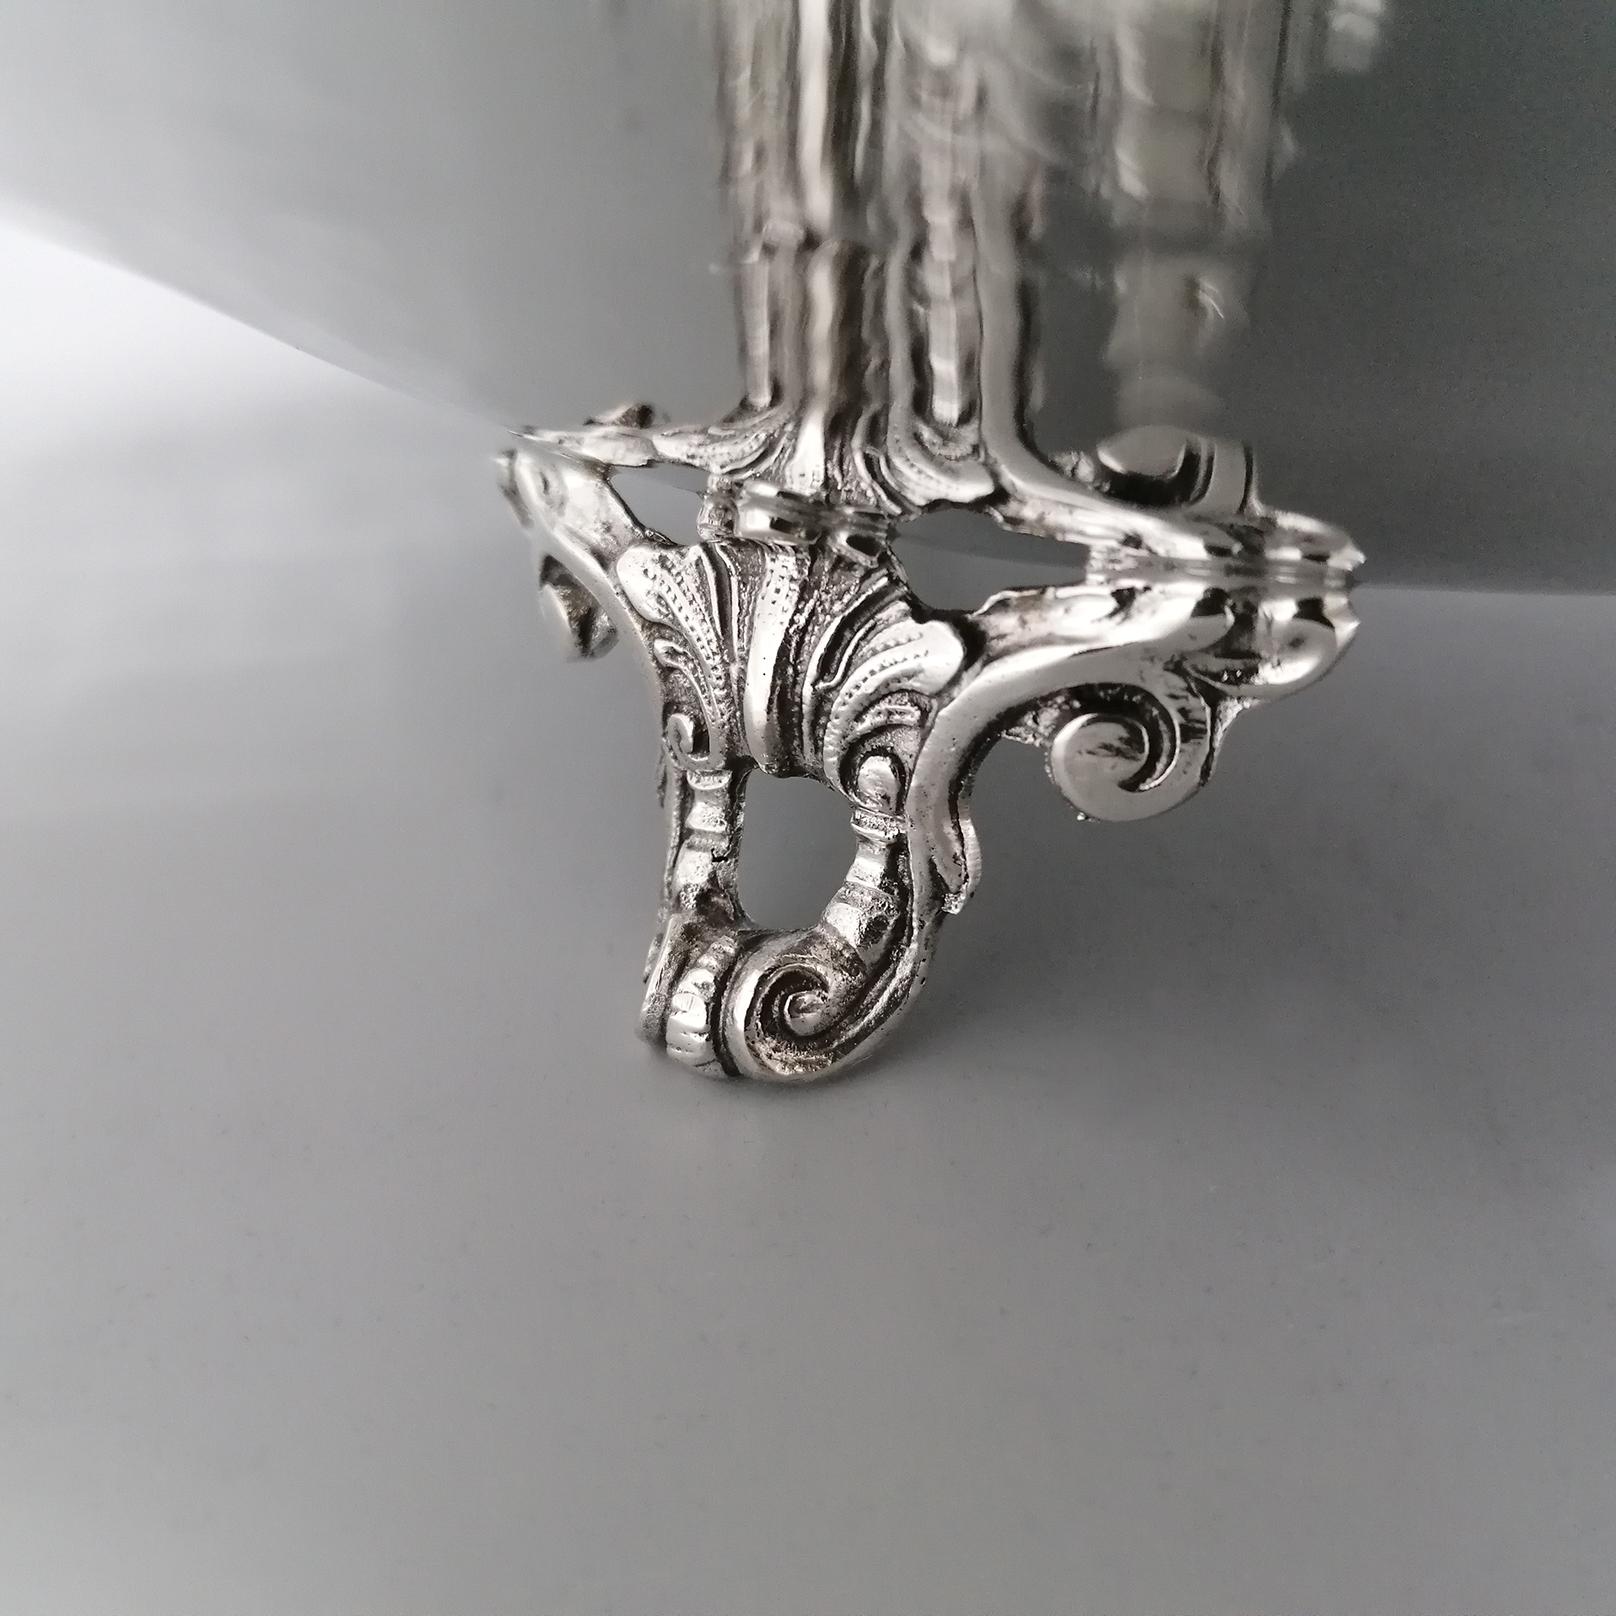 Italian Solid Silver Centerpiece Baroque revival style on feet For Sale 5